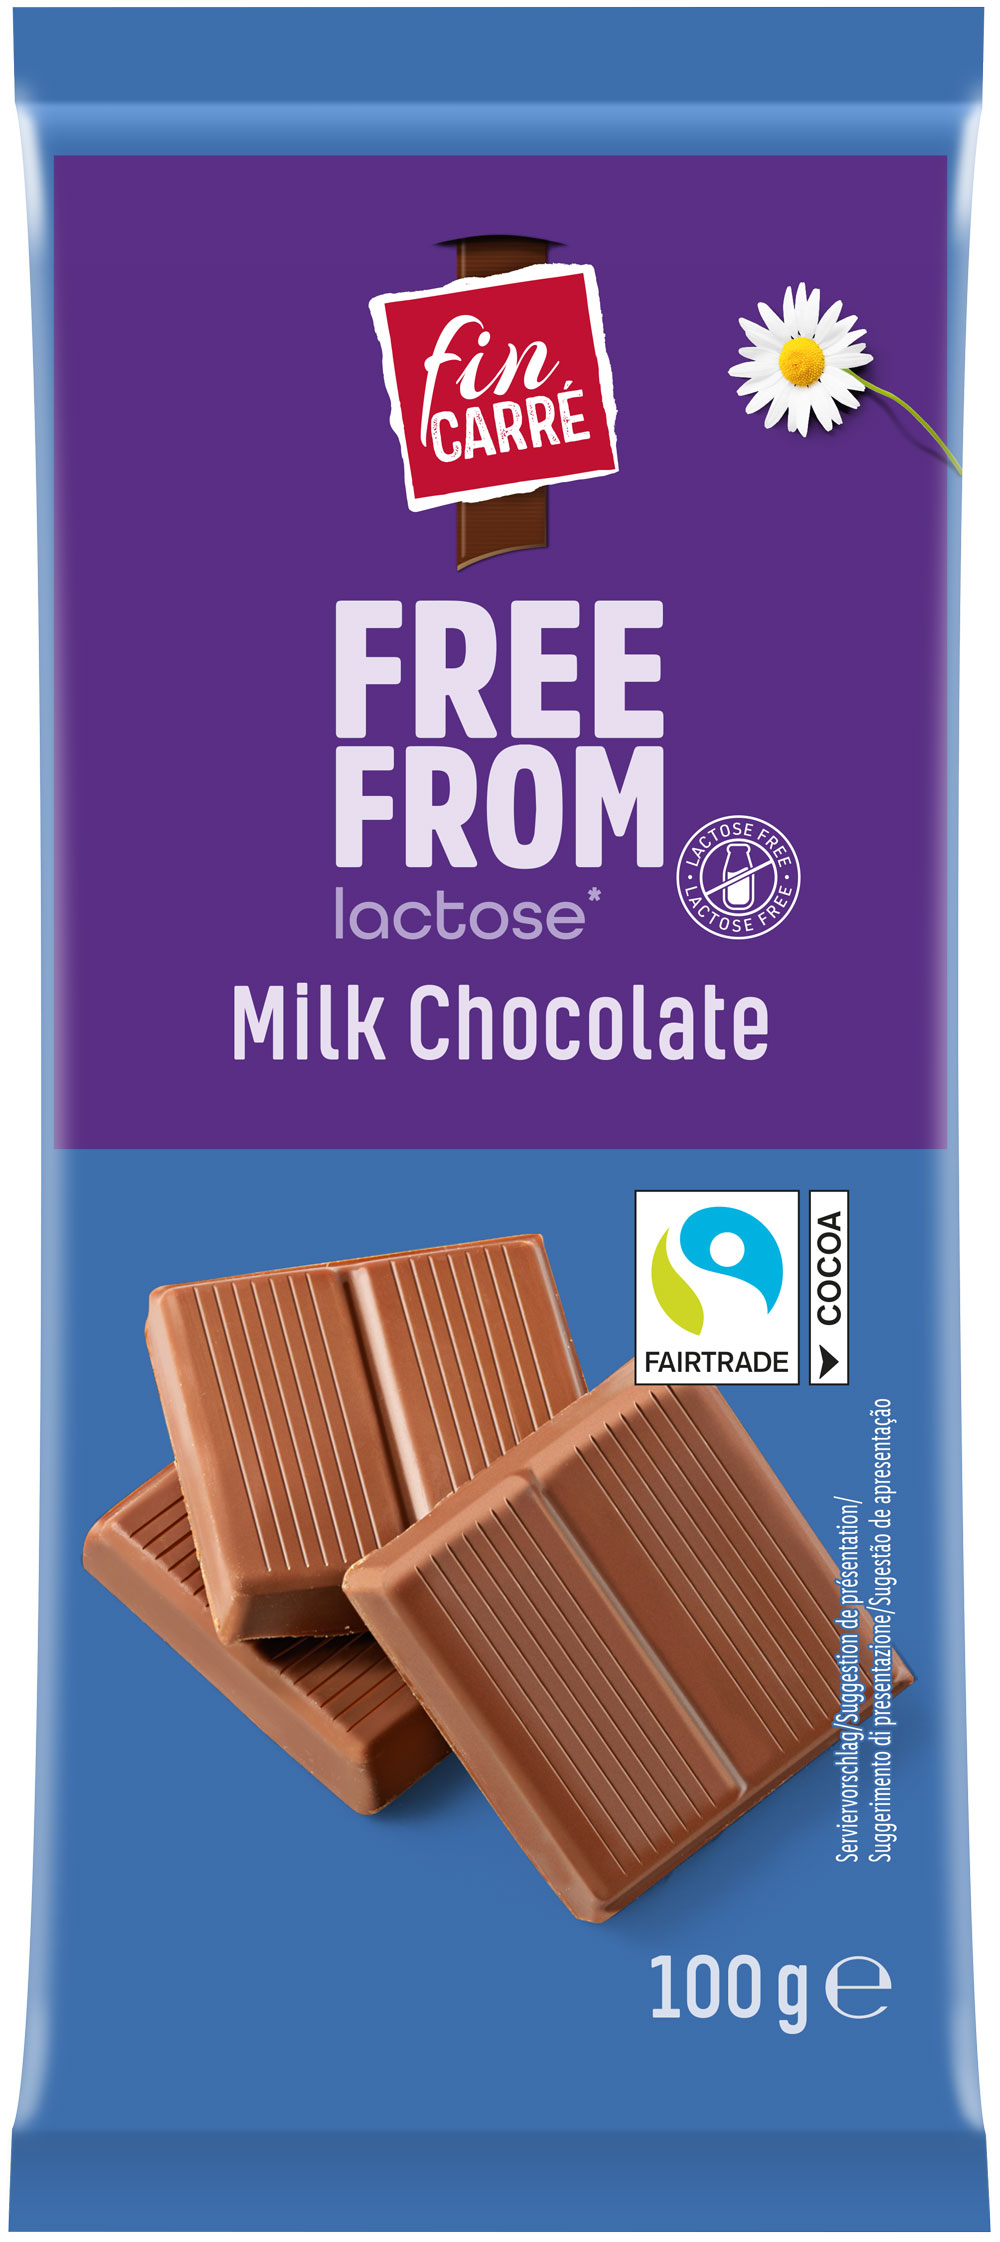 fin CARRE, FREE FROM lactose, Milk Chocolate